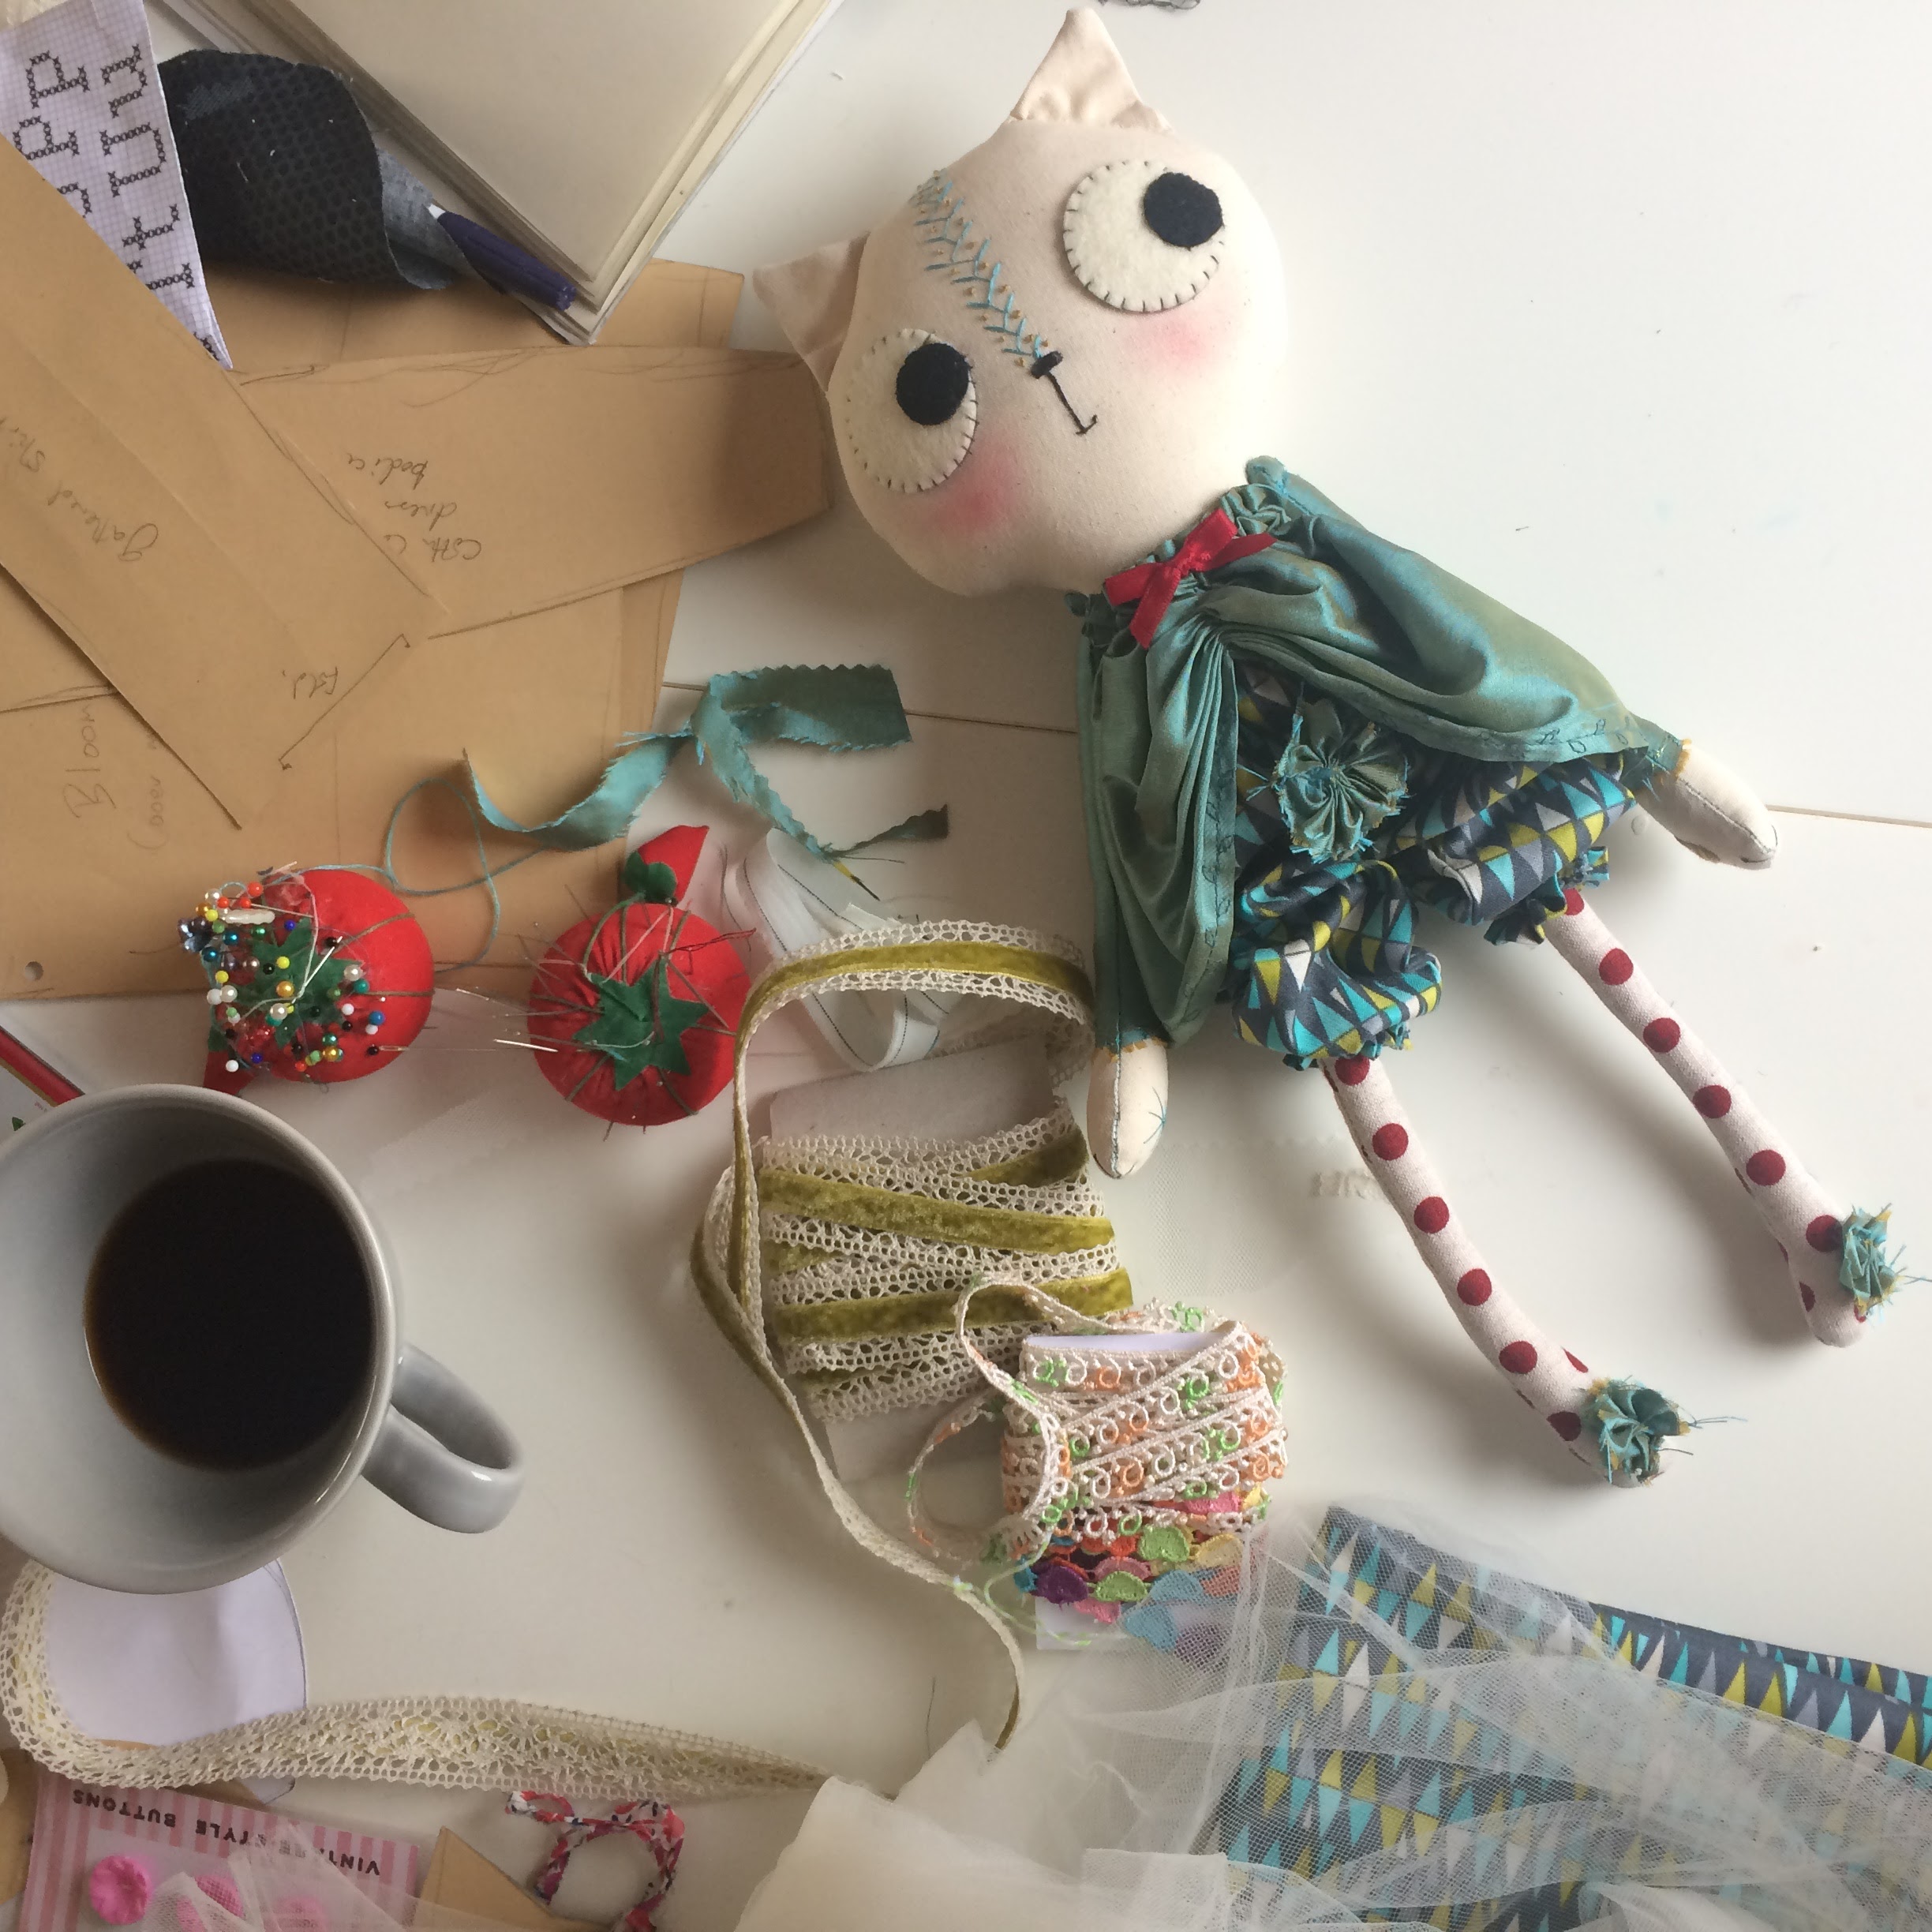 doll on worktable surrounded by fabric trim